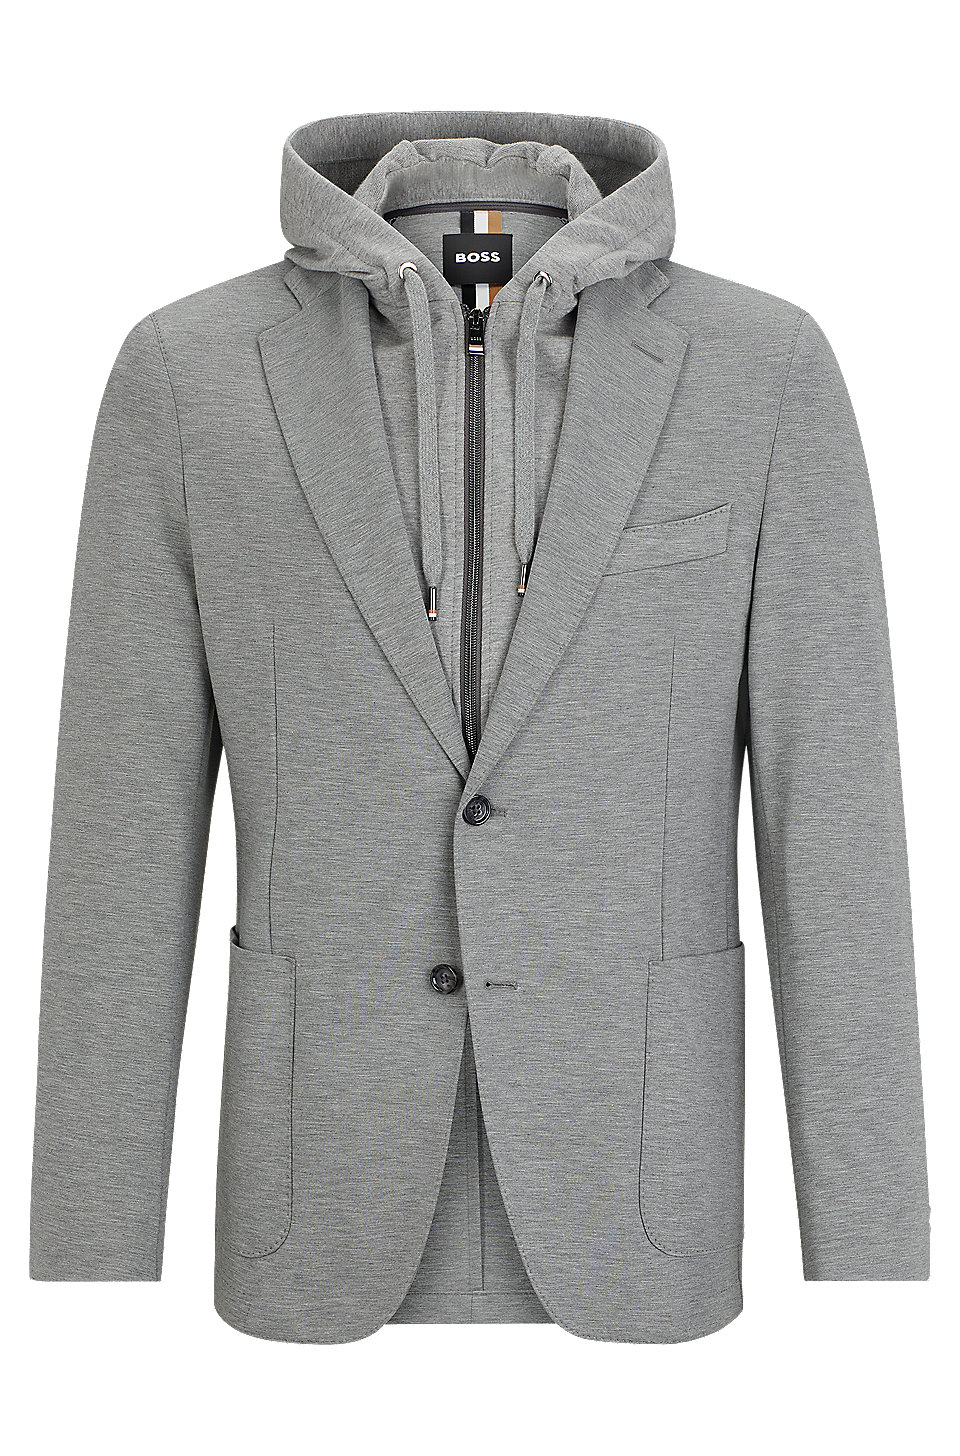 BOSS - Slim-fit jacket with zip-up hooded inner